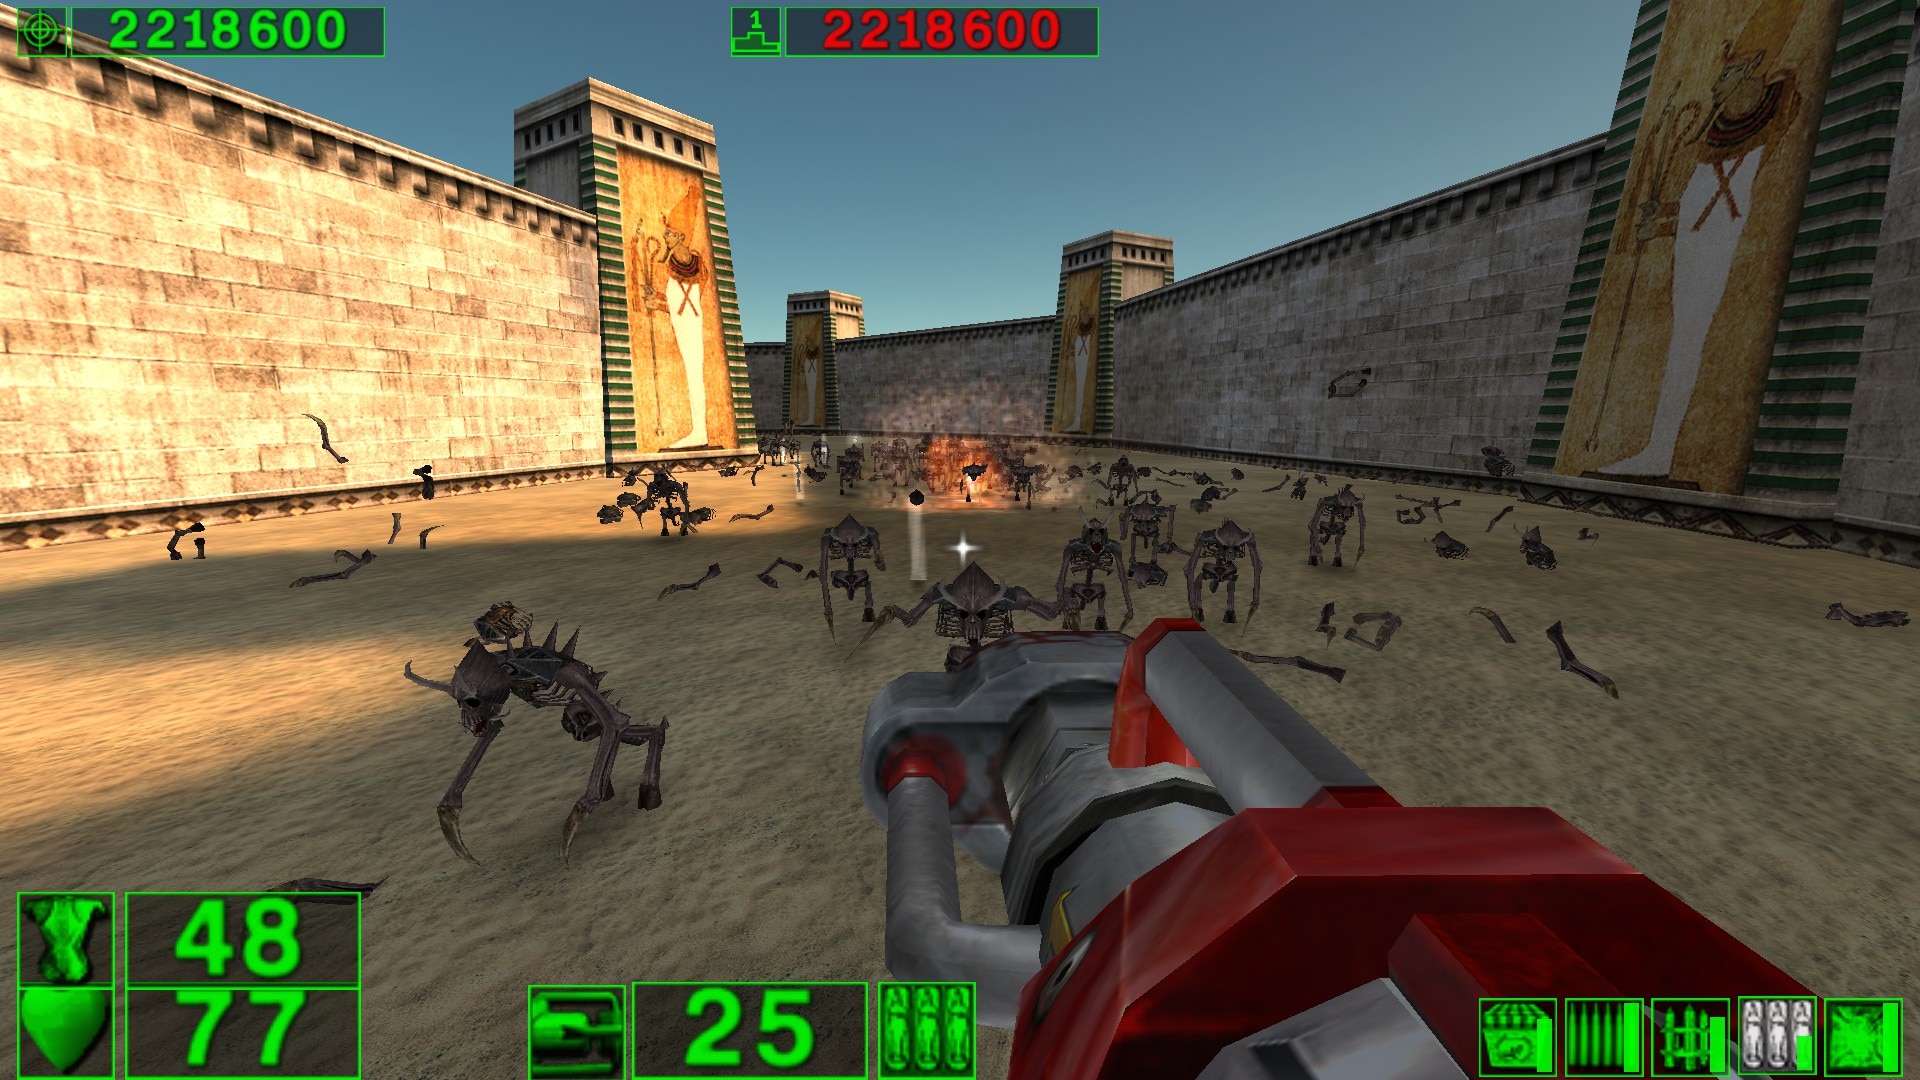 Serious Sam the first encounter Classic